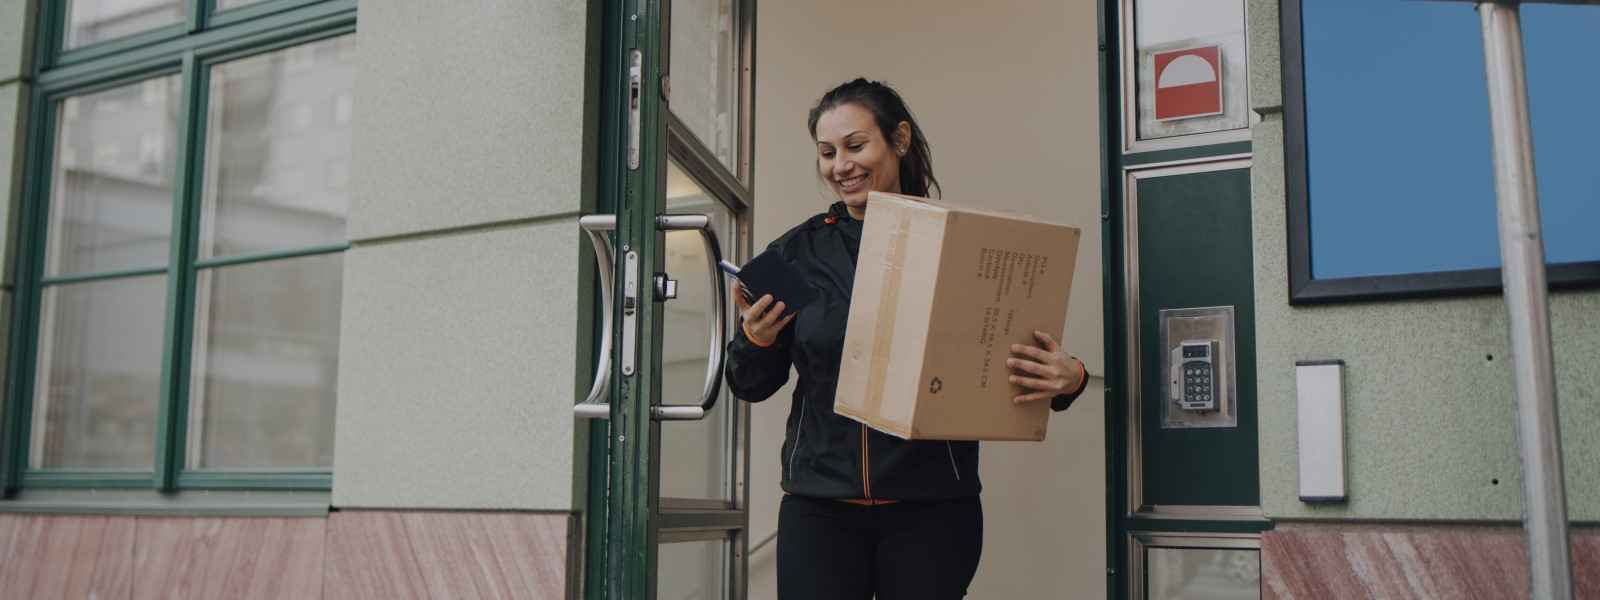 Female leaving a secure building with a delivery package